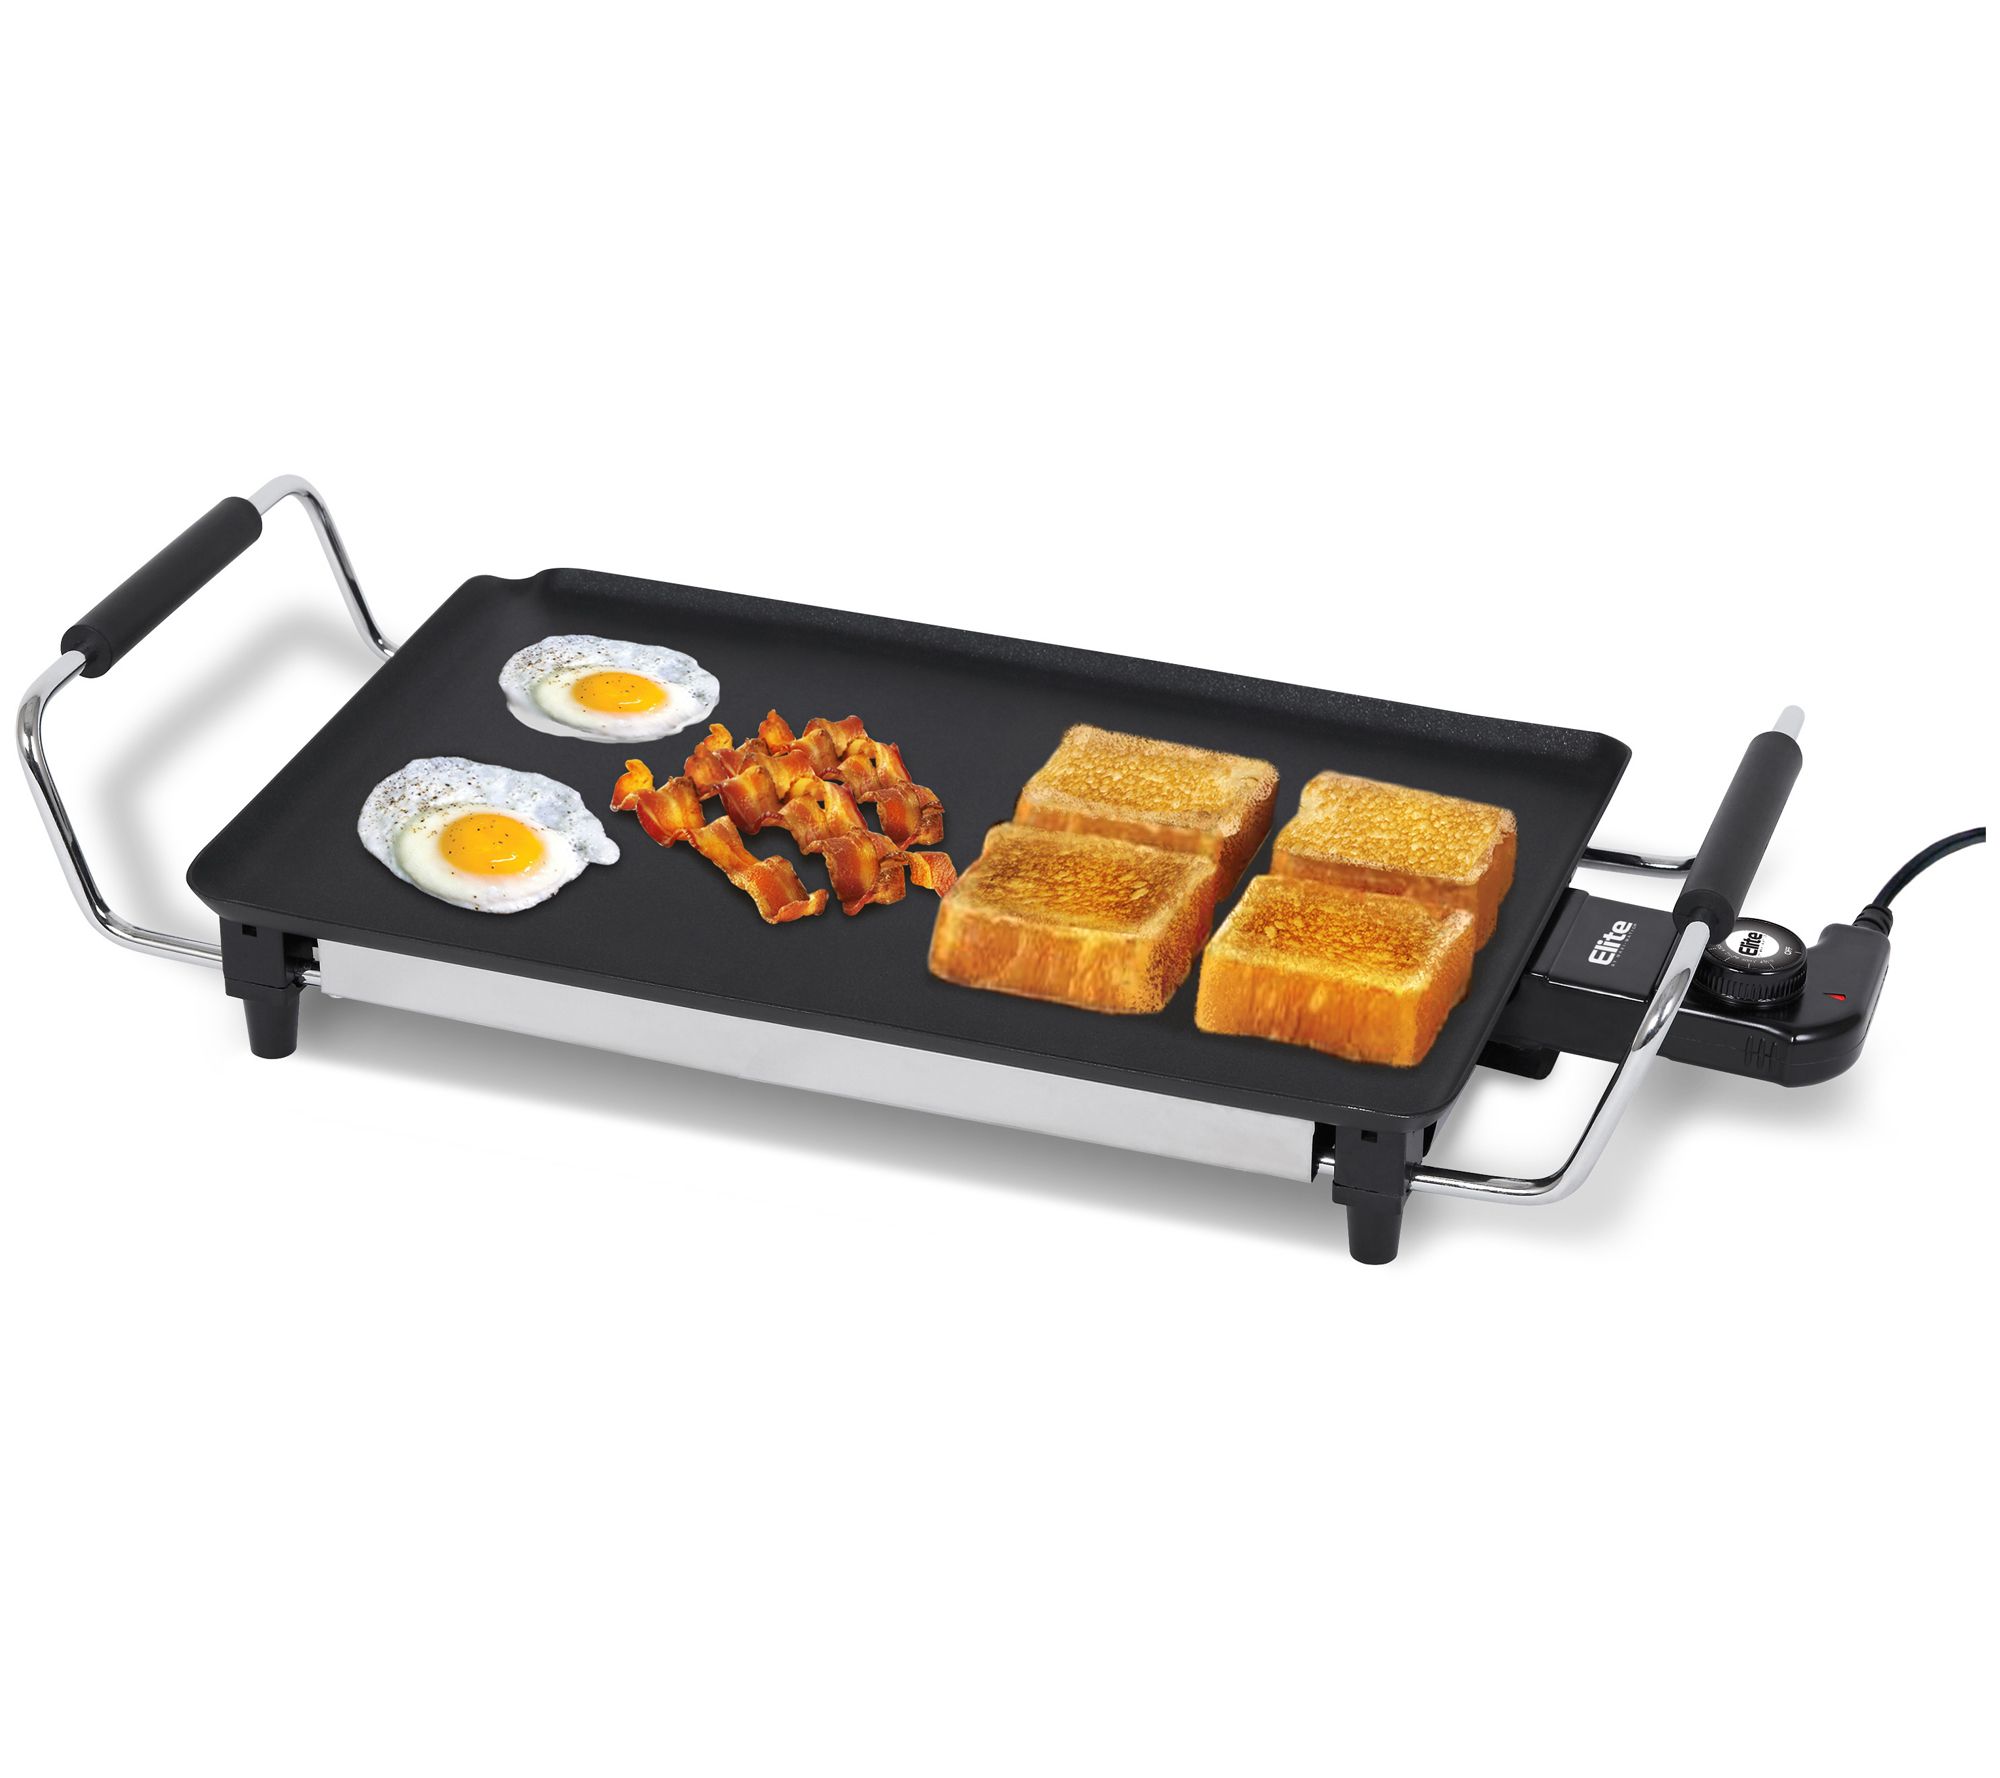 Starfrit - The Rock Electric Griddle